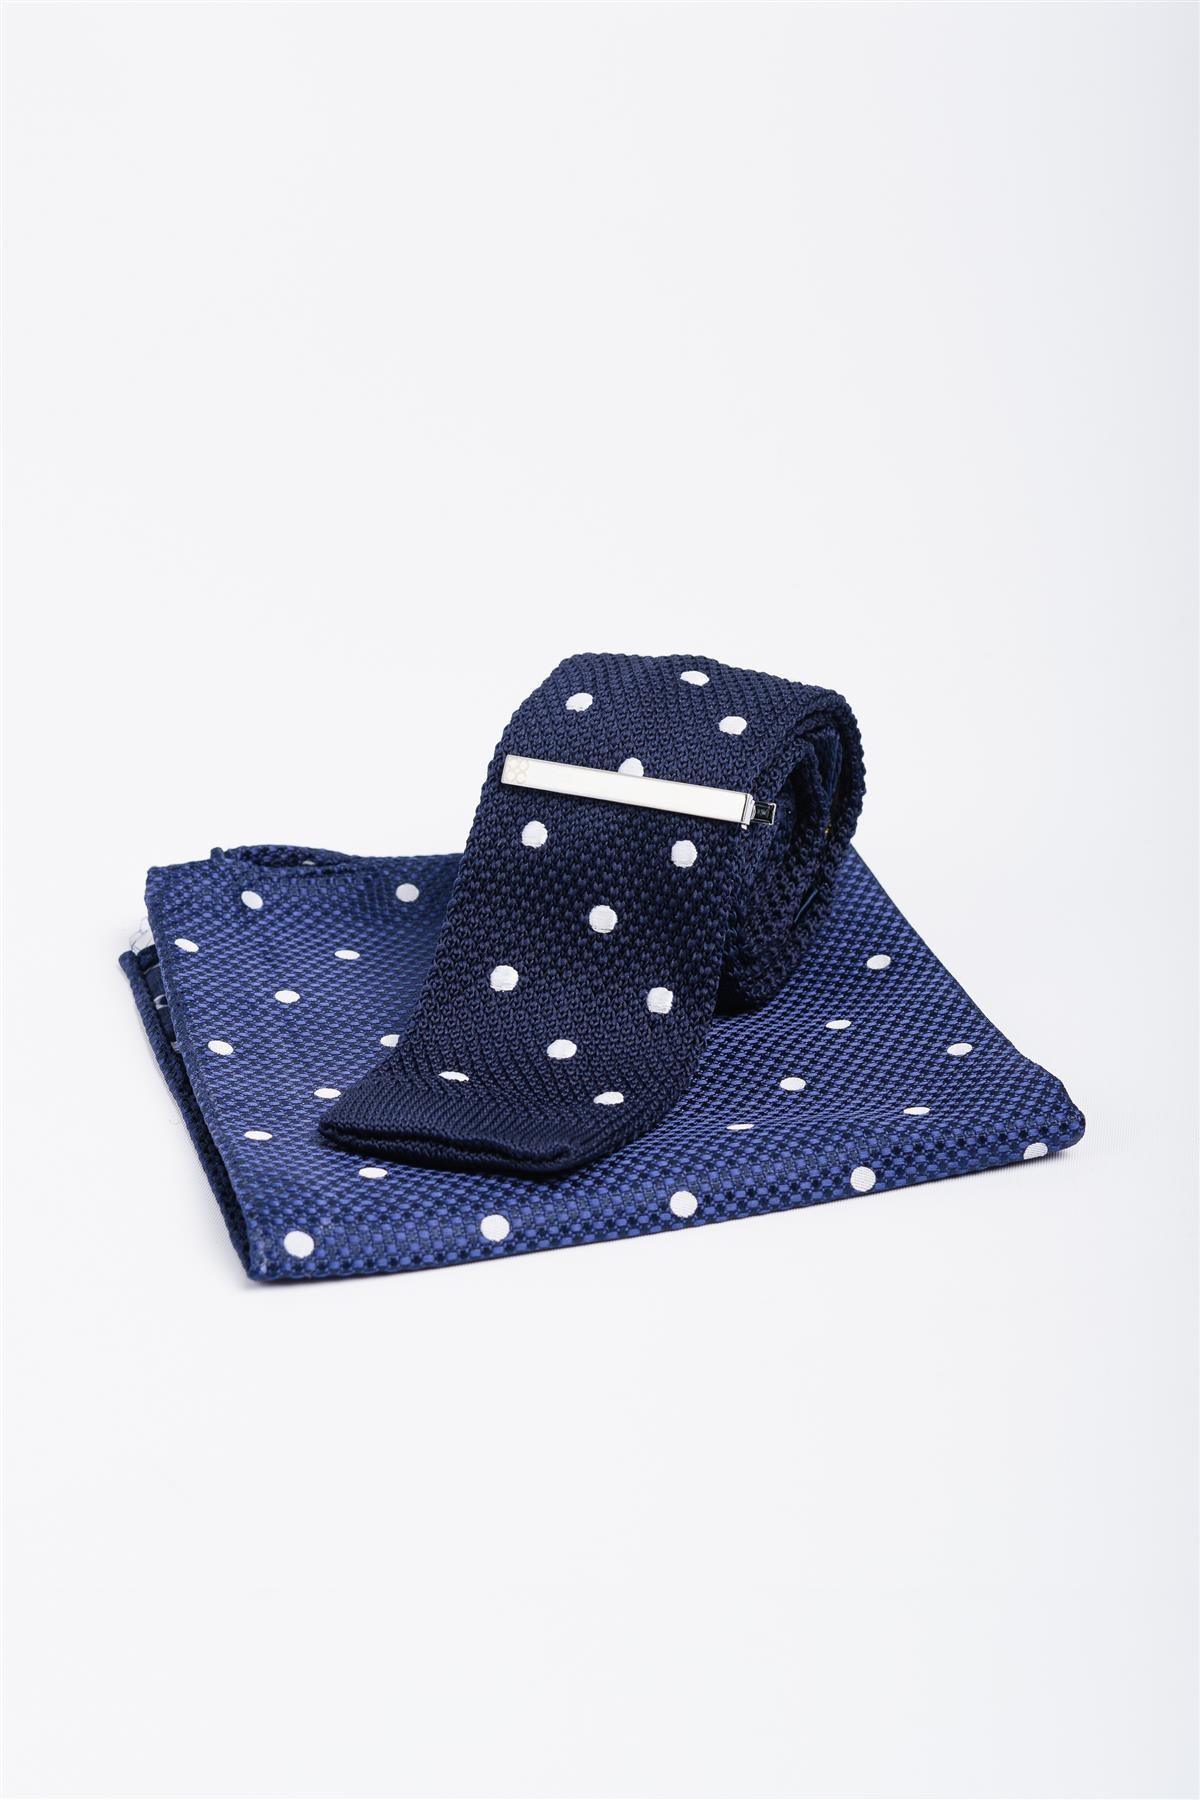 Knitted navy dot tie set